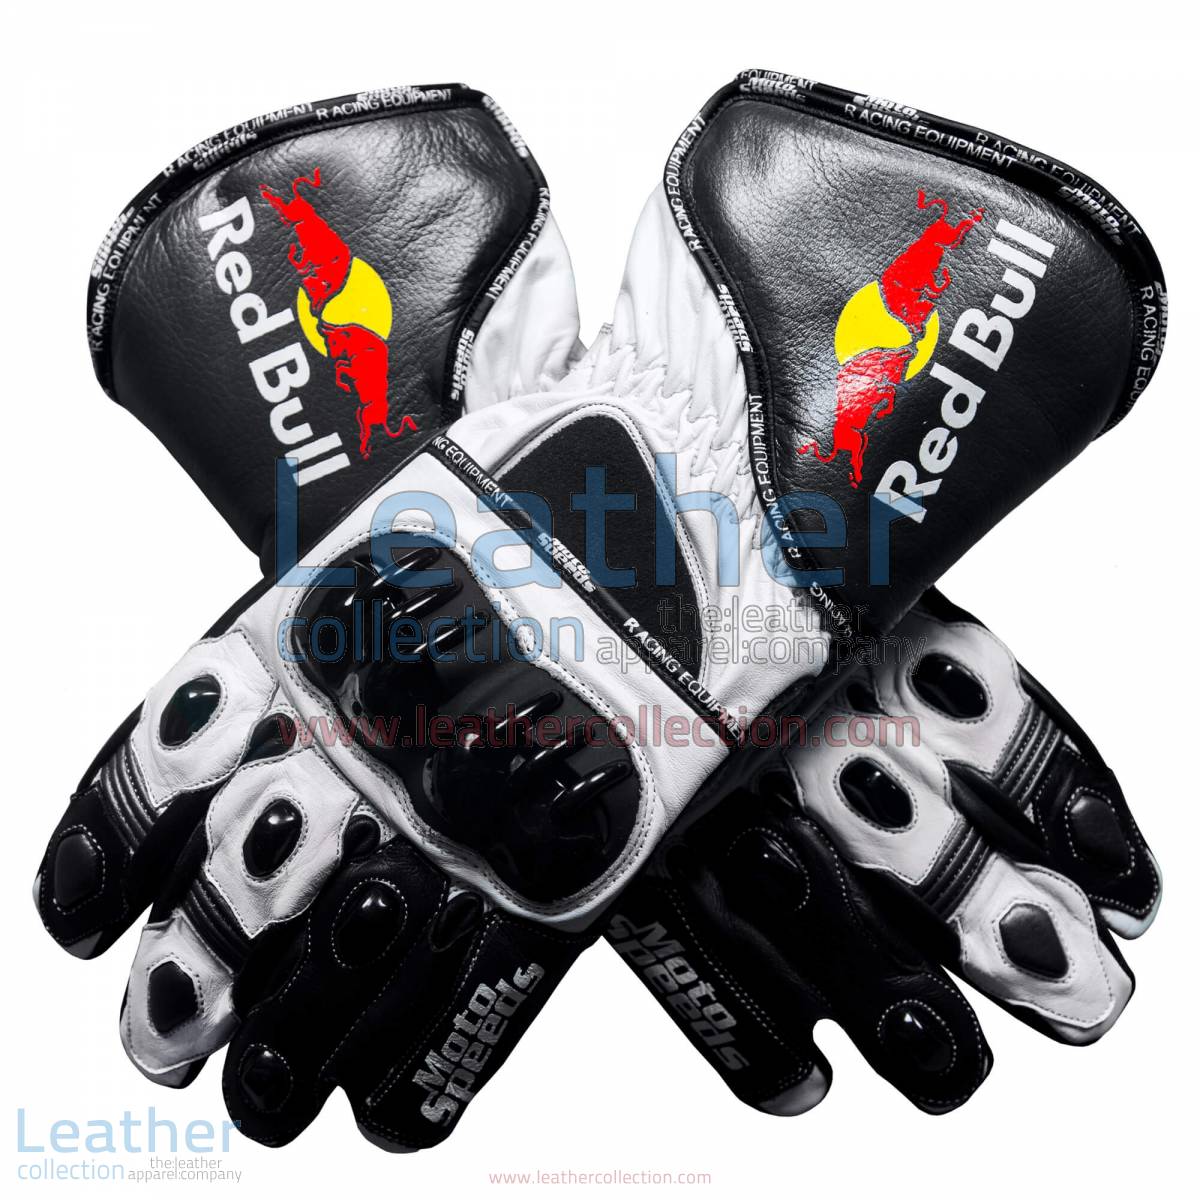 Red Bull Motorcycle Leather Gloves | motorcycle leather gloves,red bull motorcycle leather gloves